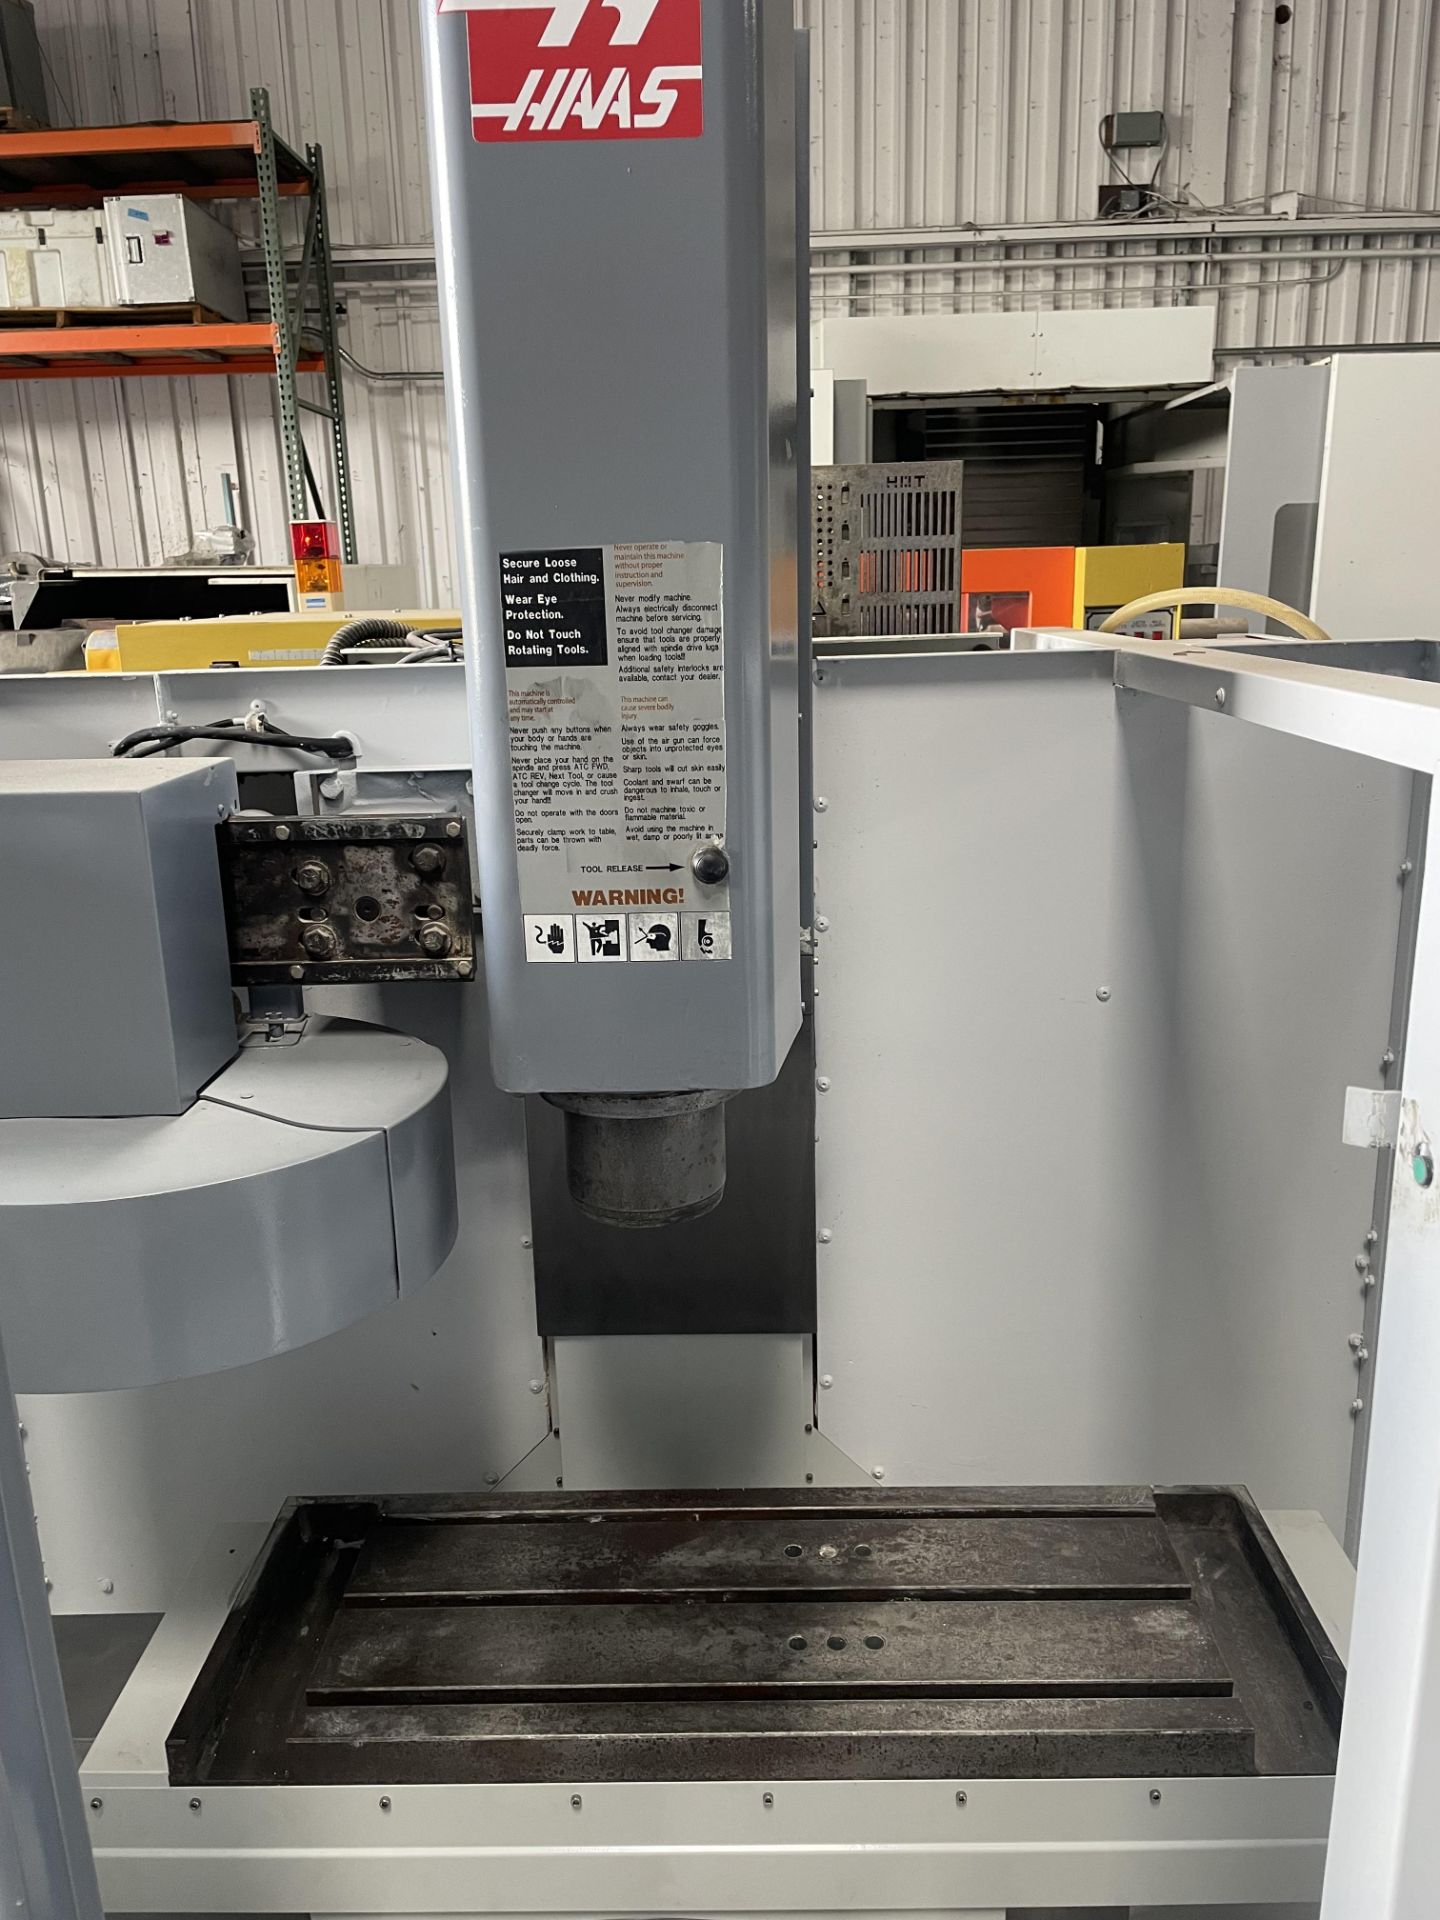 2010 HAAS MINI MILL CNC Vertical Machining Center - Image 4 of 9